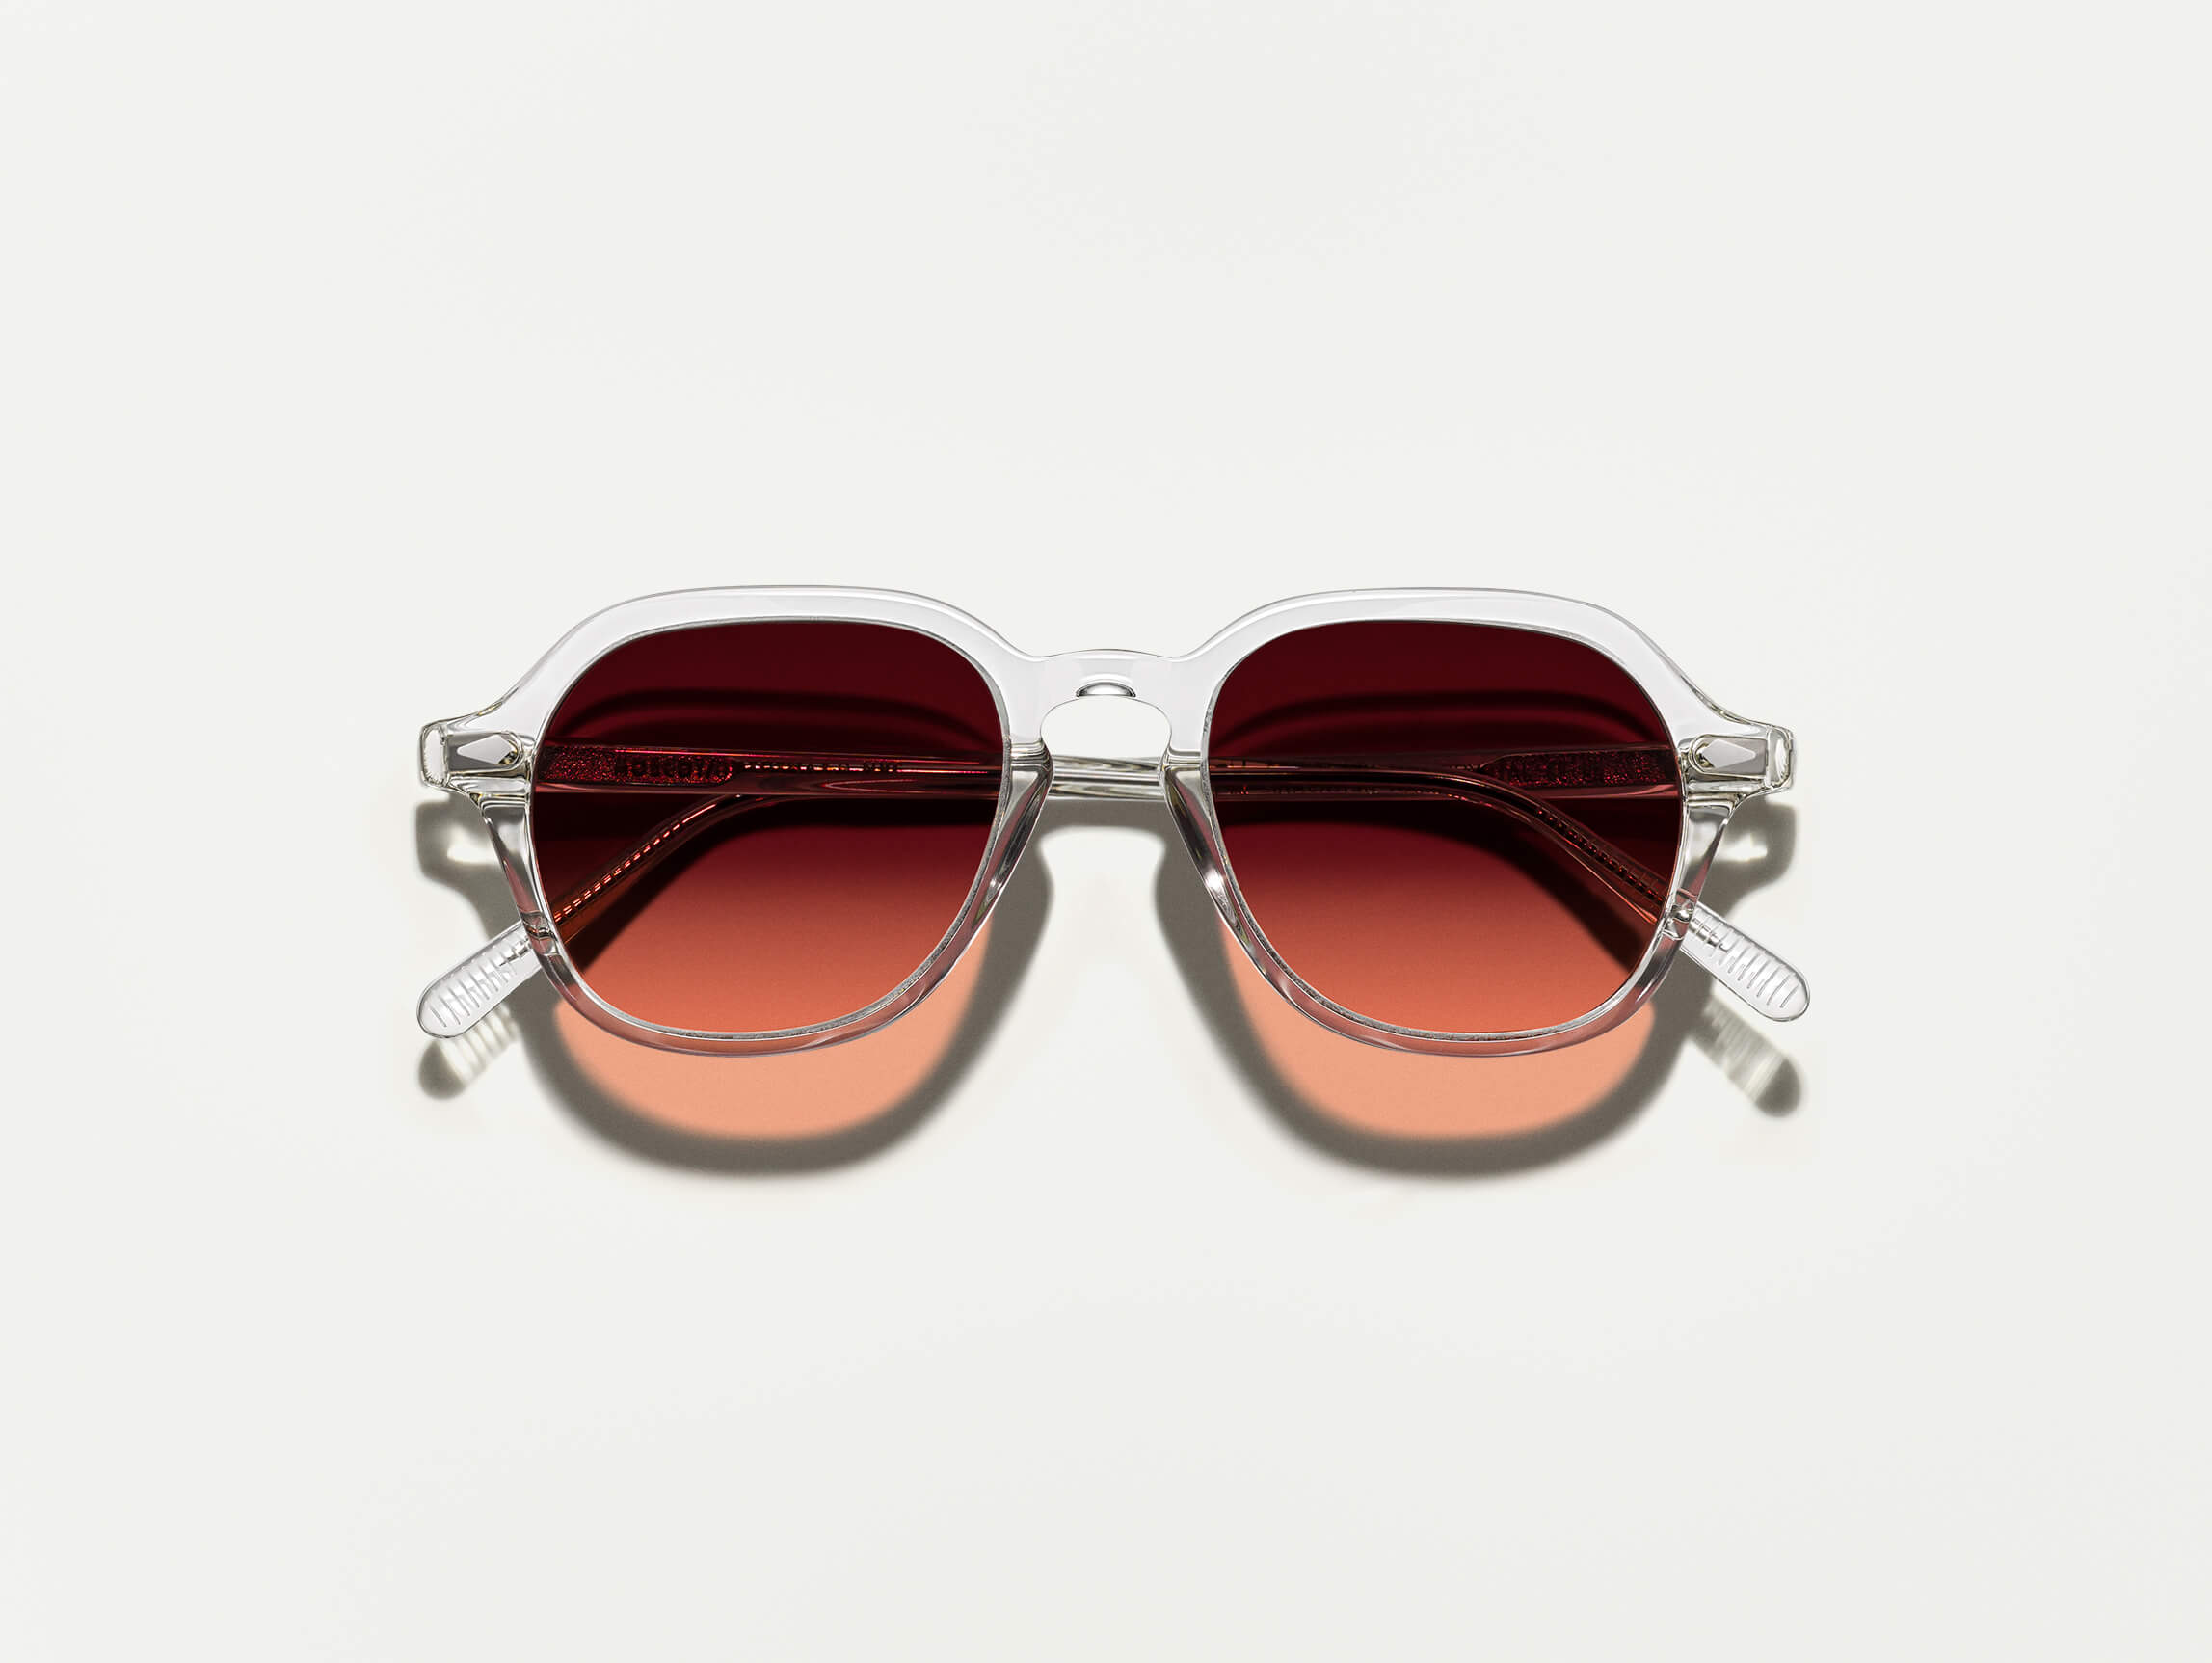 The YENEM SUN in Crystal with Cabernet Tinted Lenses